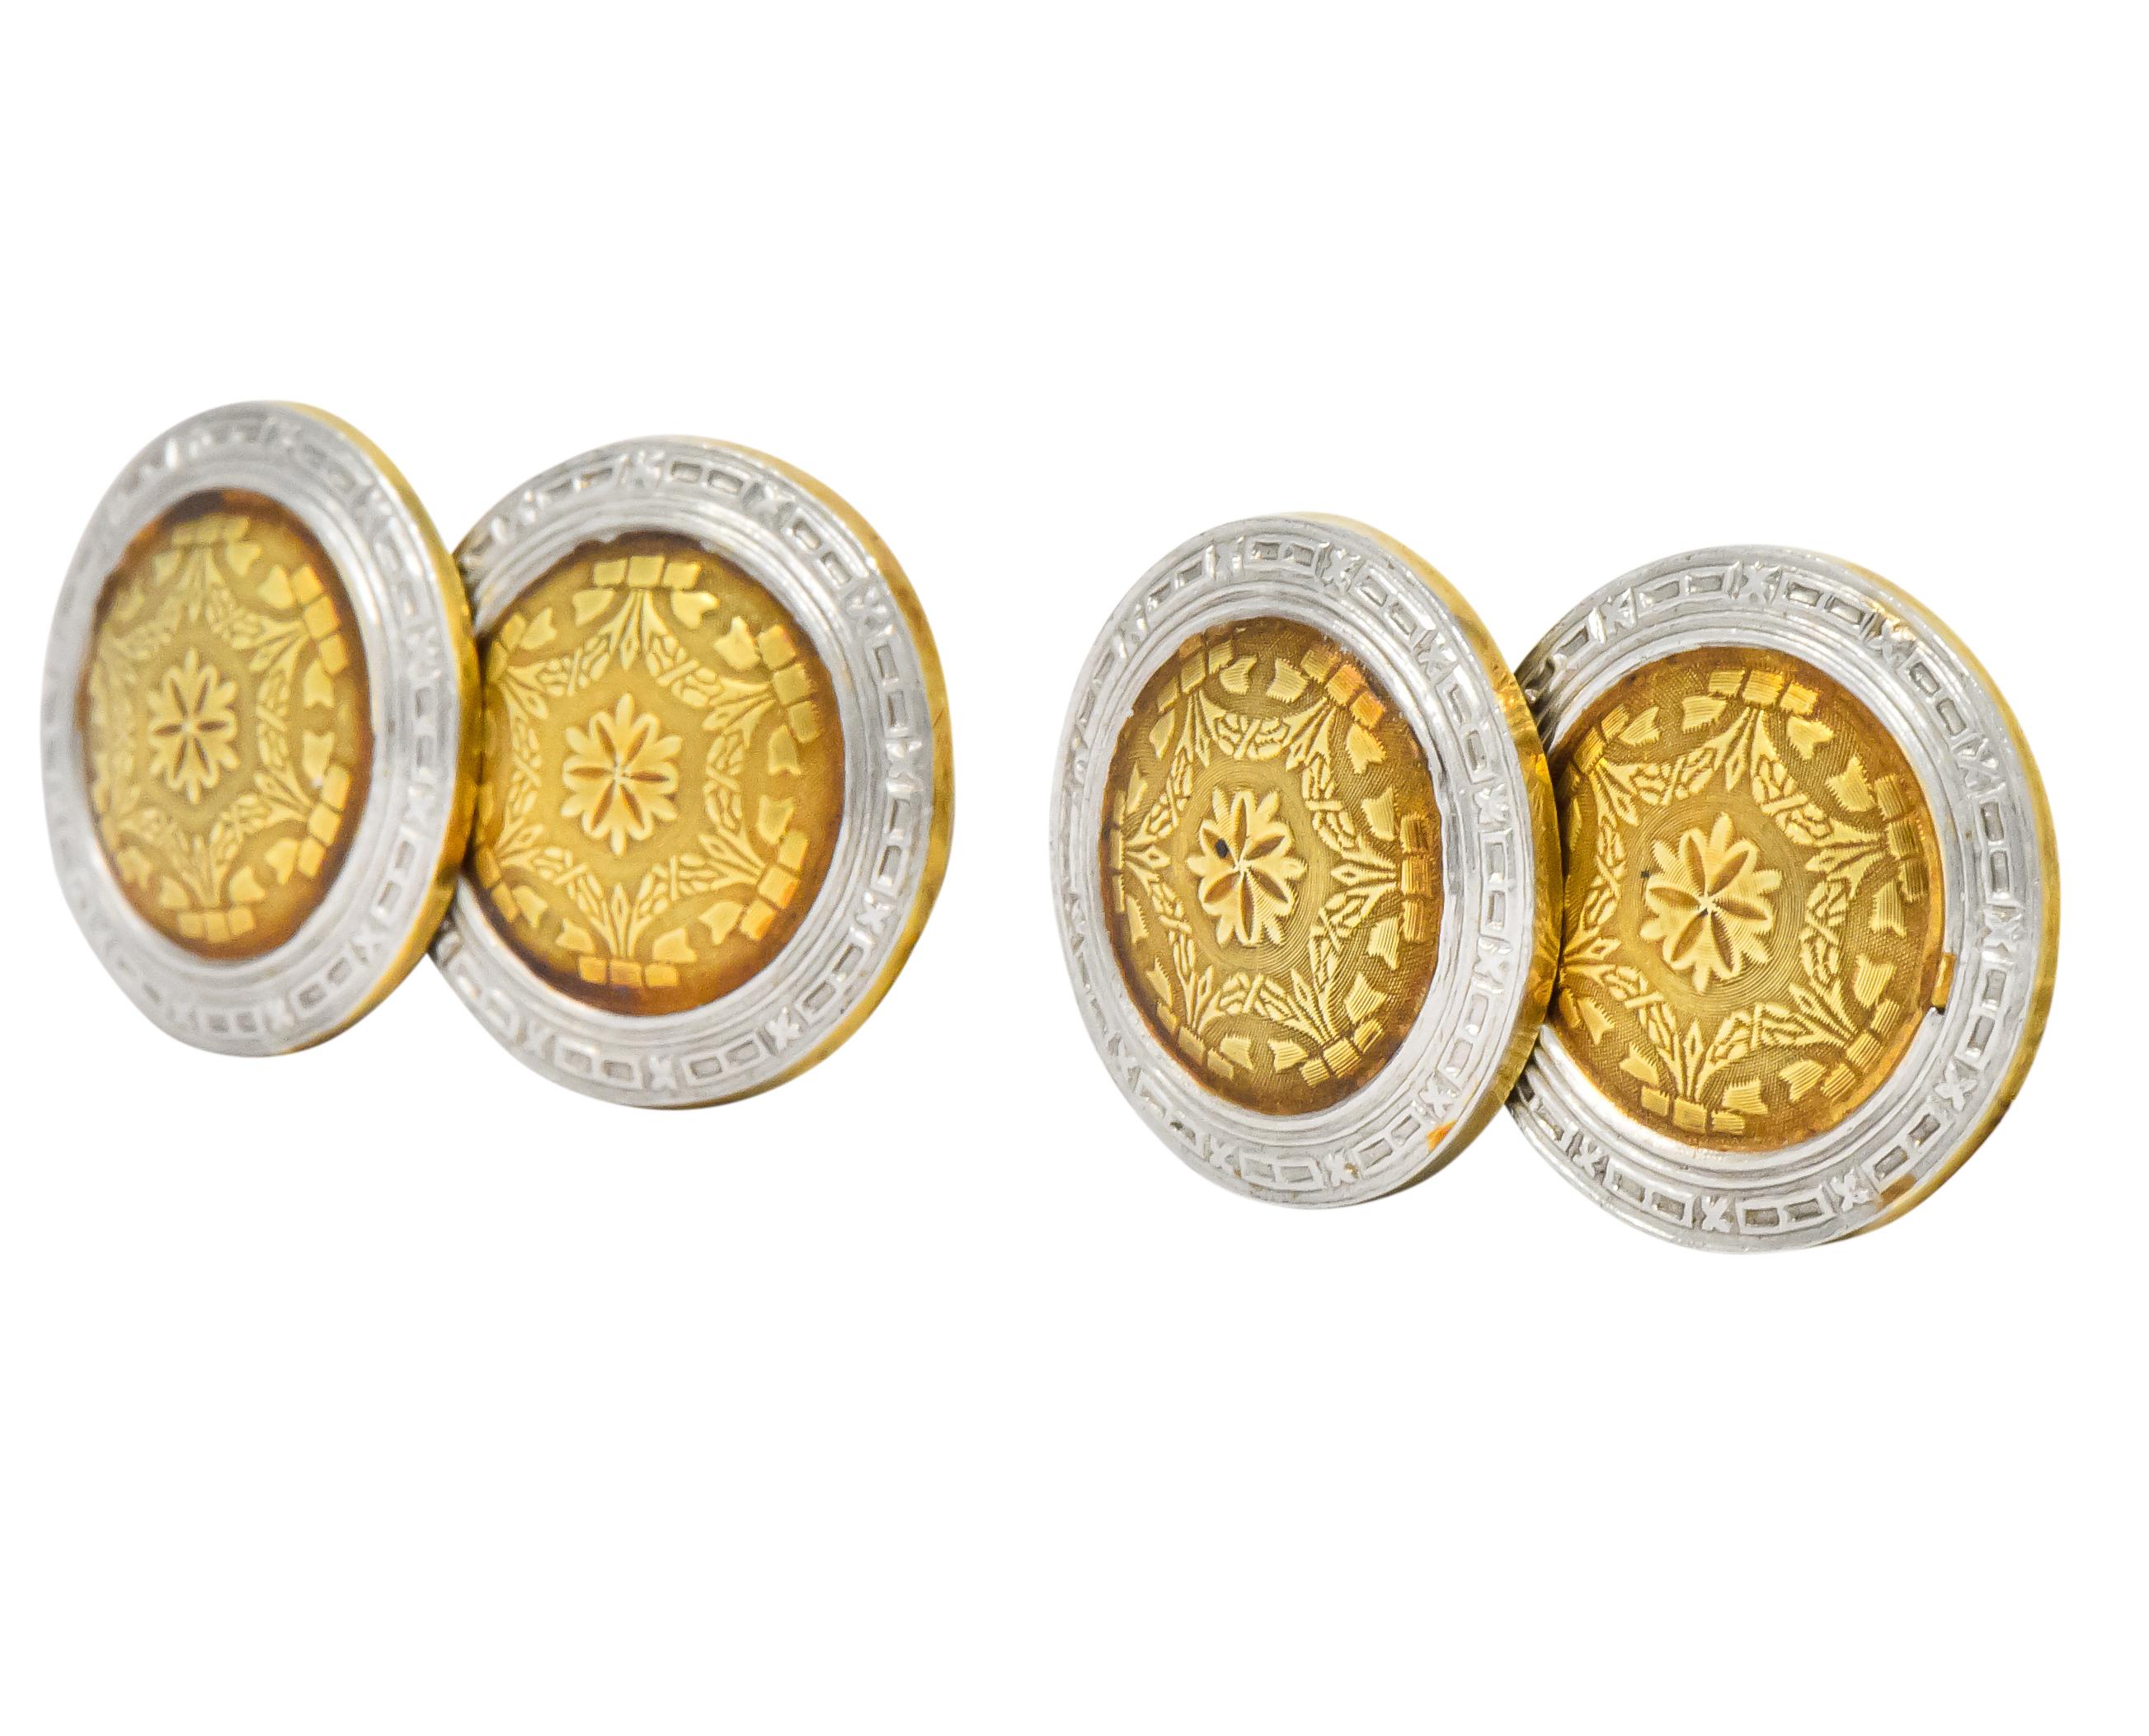 Link style cufflinks with matching discs on each end measuring 15.3 mm

Discs feature a platinum-topped outer circle with an engraved X and dash pattern and a central gold circle with engraved bow and foliate motif centering a floral design

Circa